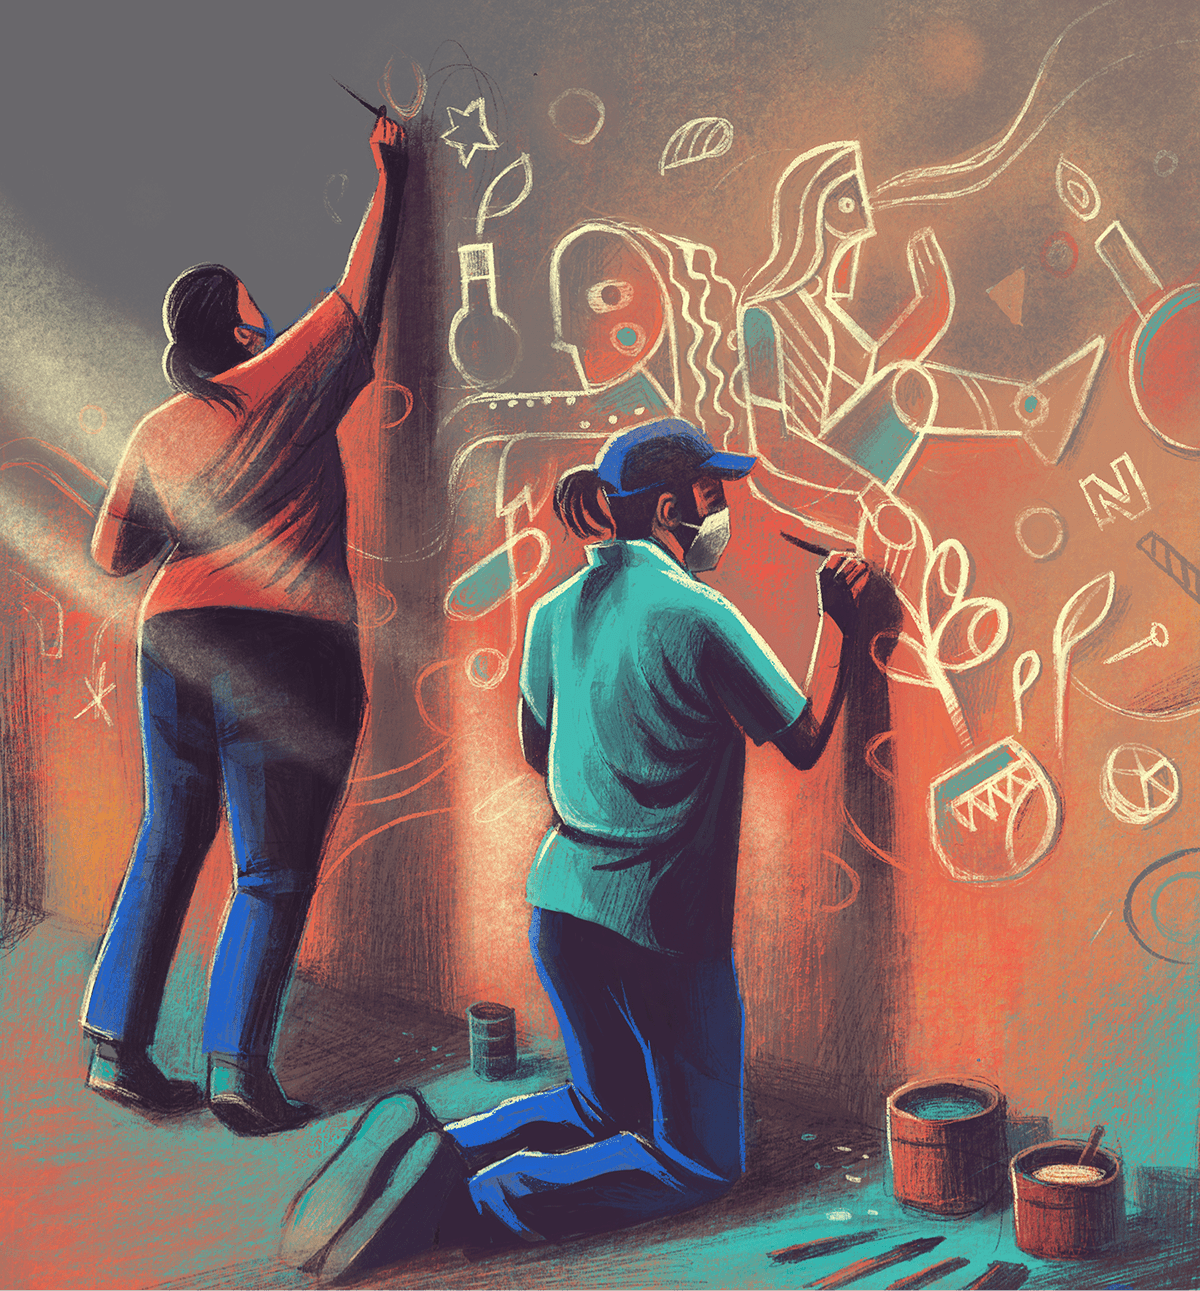 Enthusiastic youngsters quietly going about transforming some of the boring walls to a canvas bringing about change/awareness in the streets of Bangalore - illustration by ranganath krishnamani